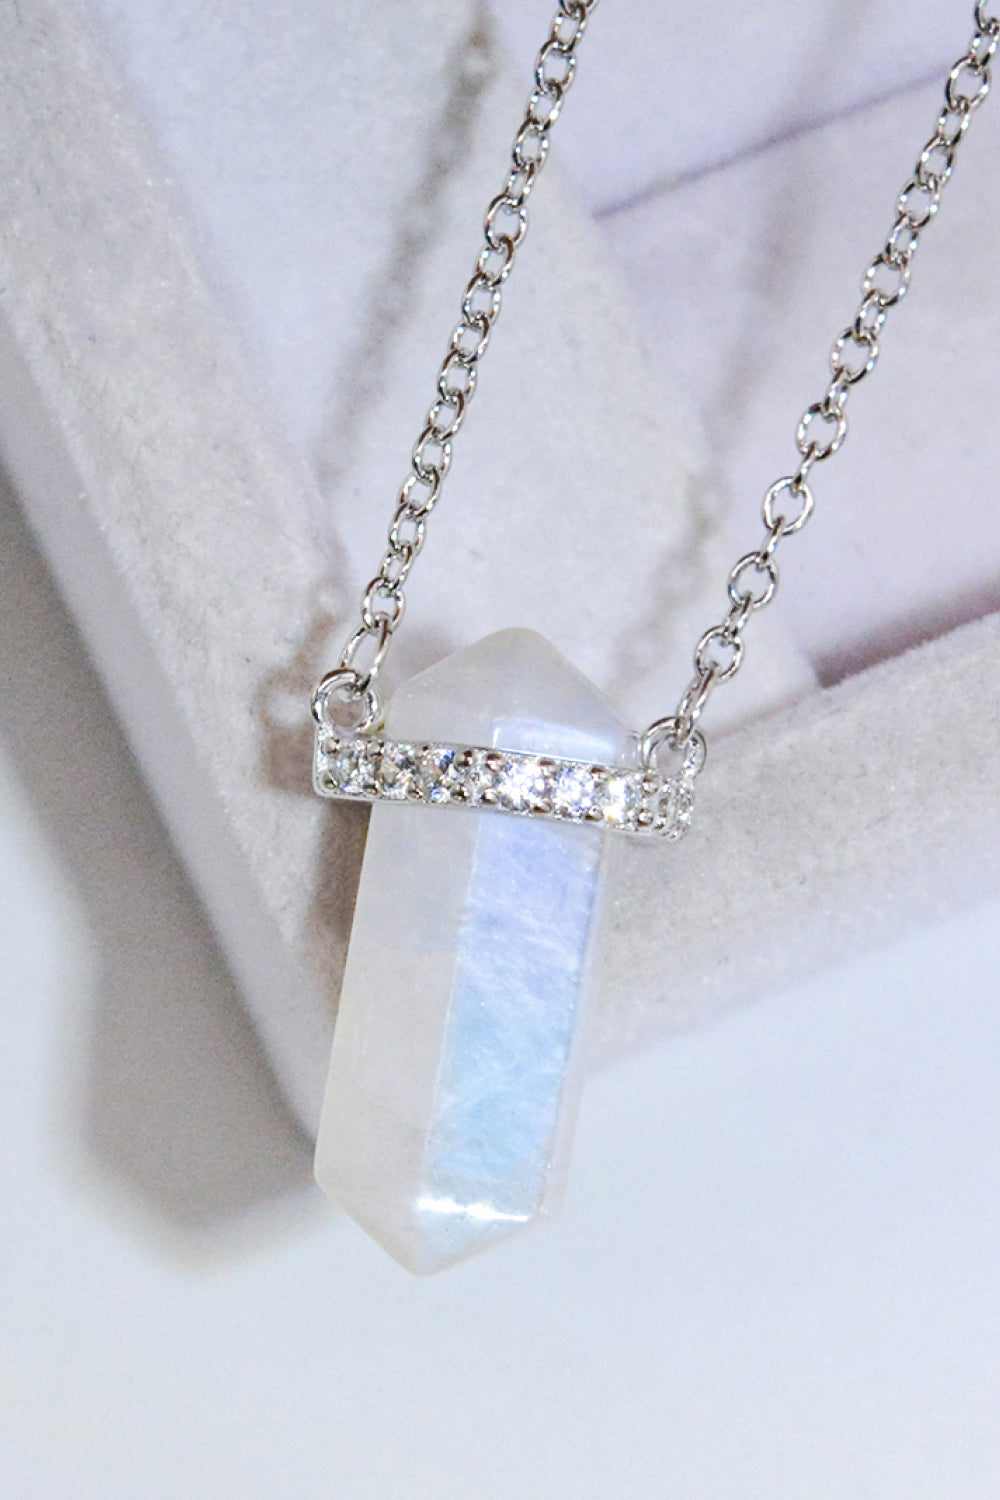 Natural Moonstone Chain-Link Necklace - Shop women apparel, Jewelry, bath & beauty products online - Arwen's Boutique